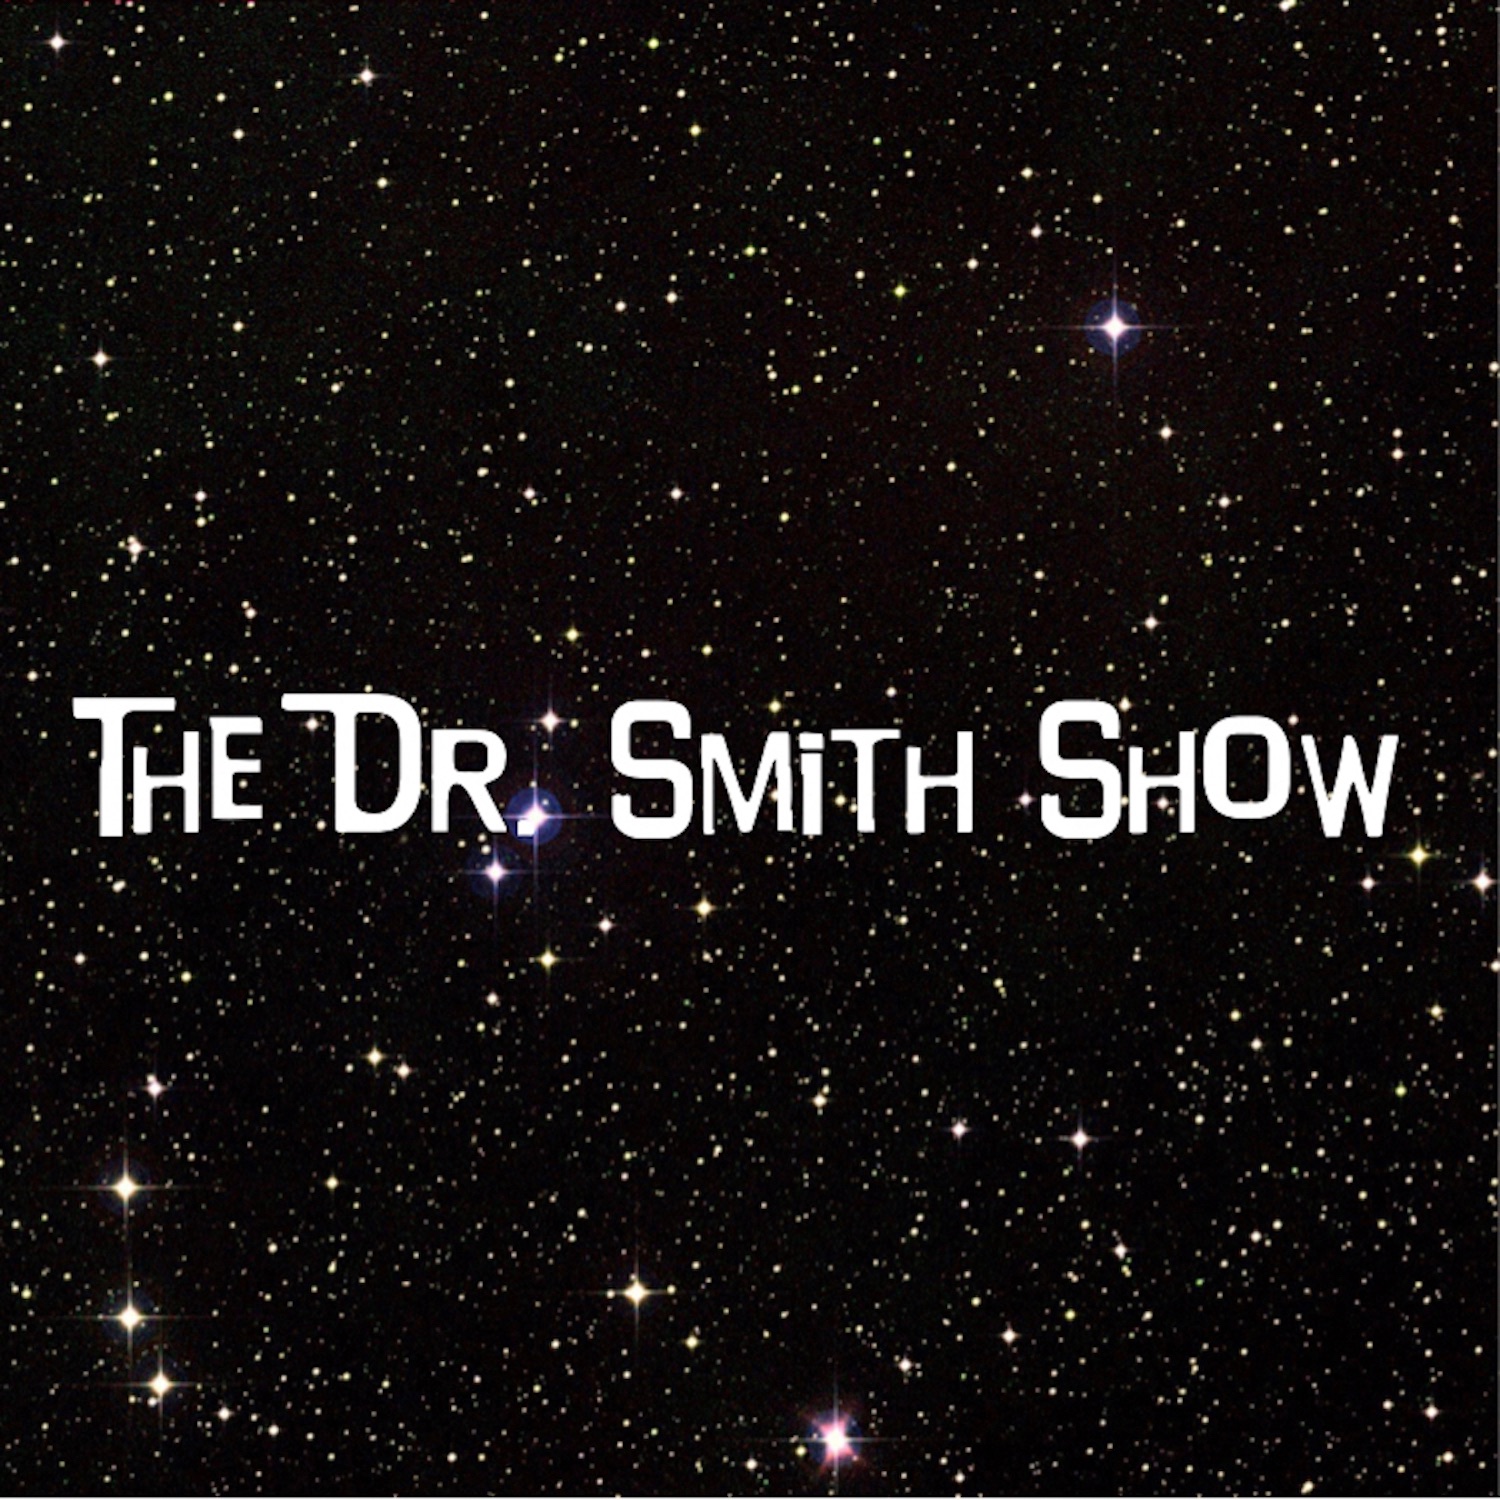 The Dr. Smith Show